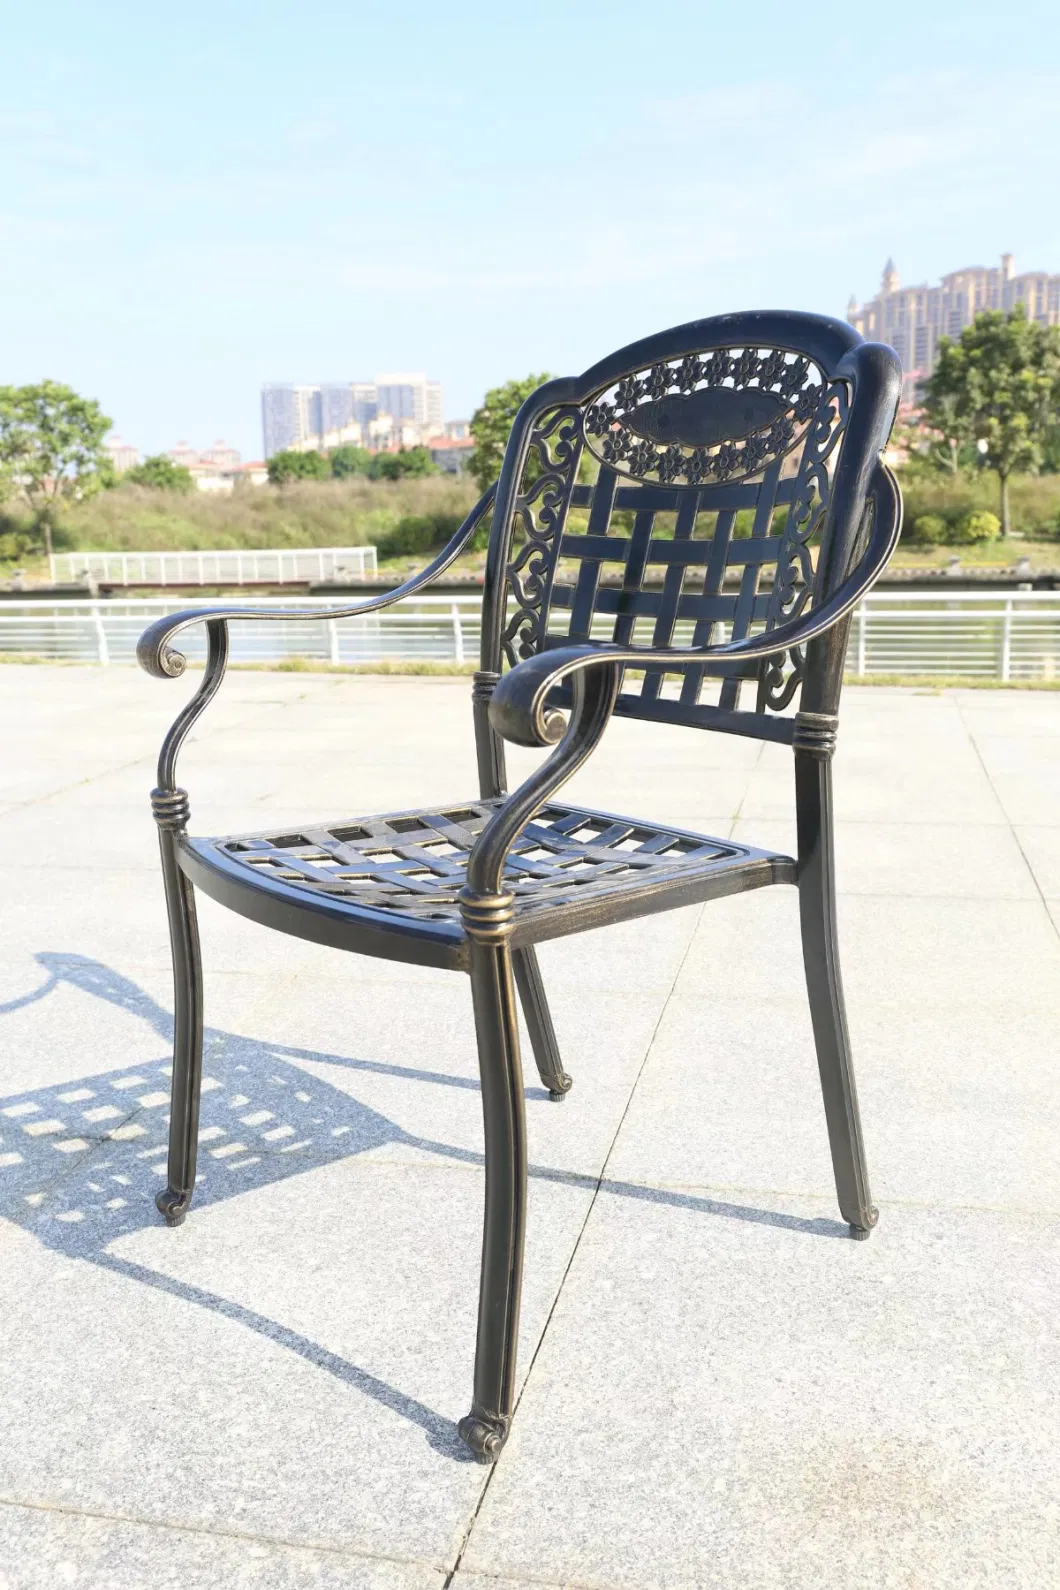 Patio Outdoor Furniture Cast Aluminum Chairs and Dining Chair Covers for Dining Table Garden Metal